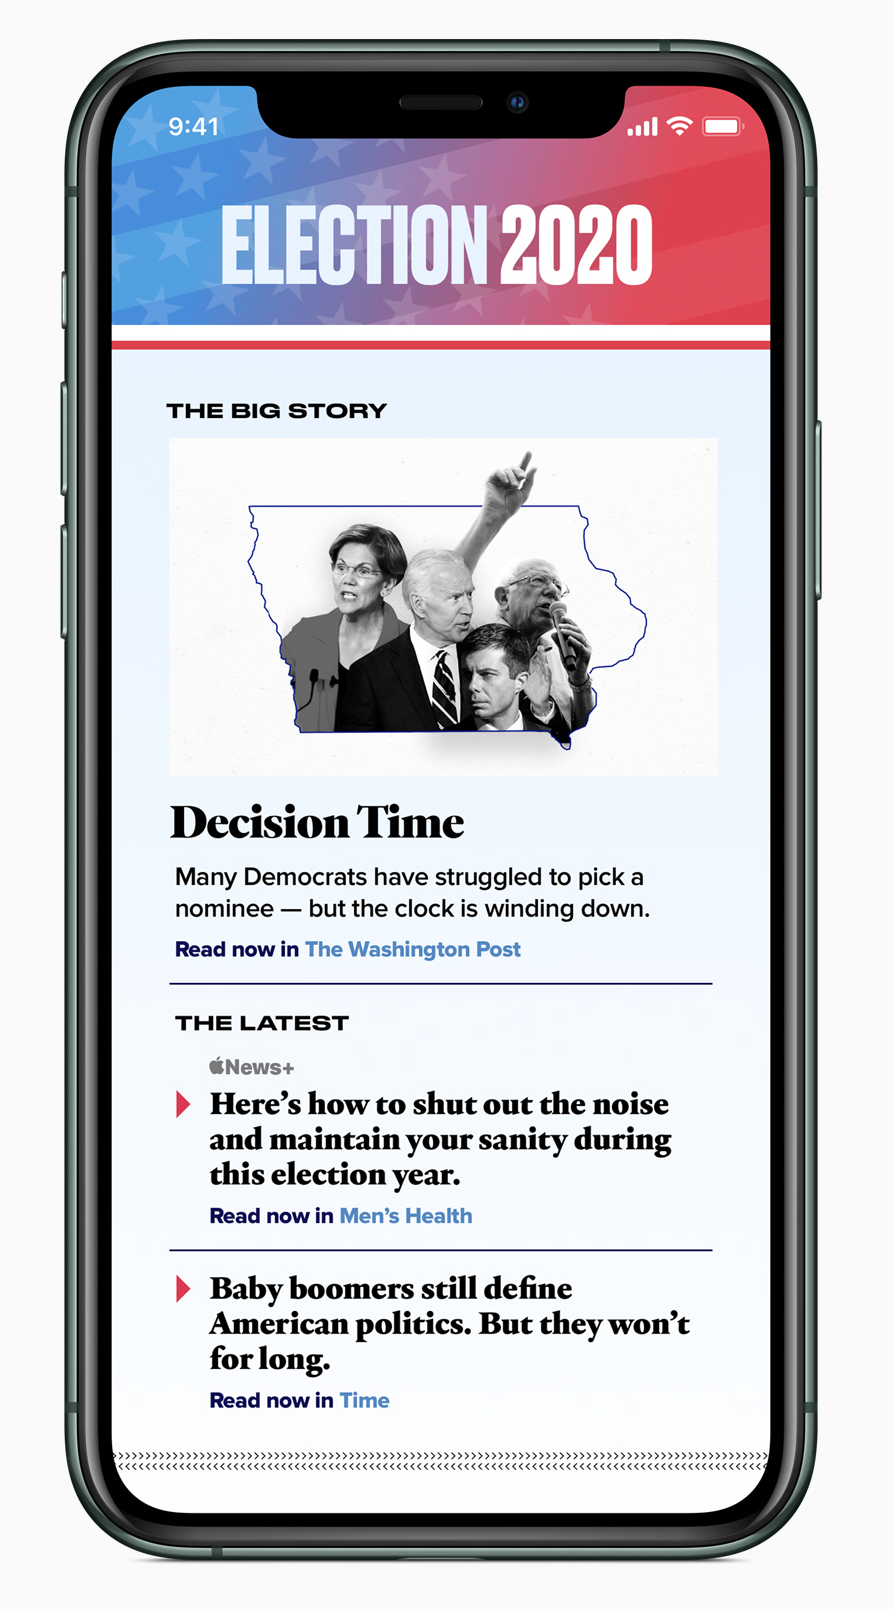 Apple News launches special coverage of the 2020 presidential election